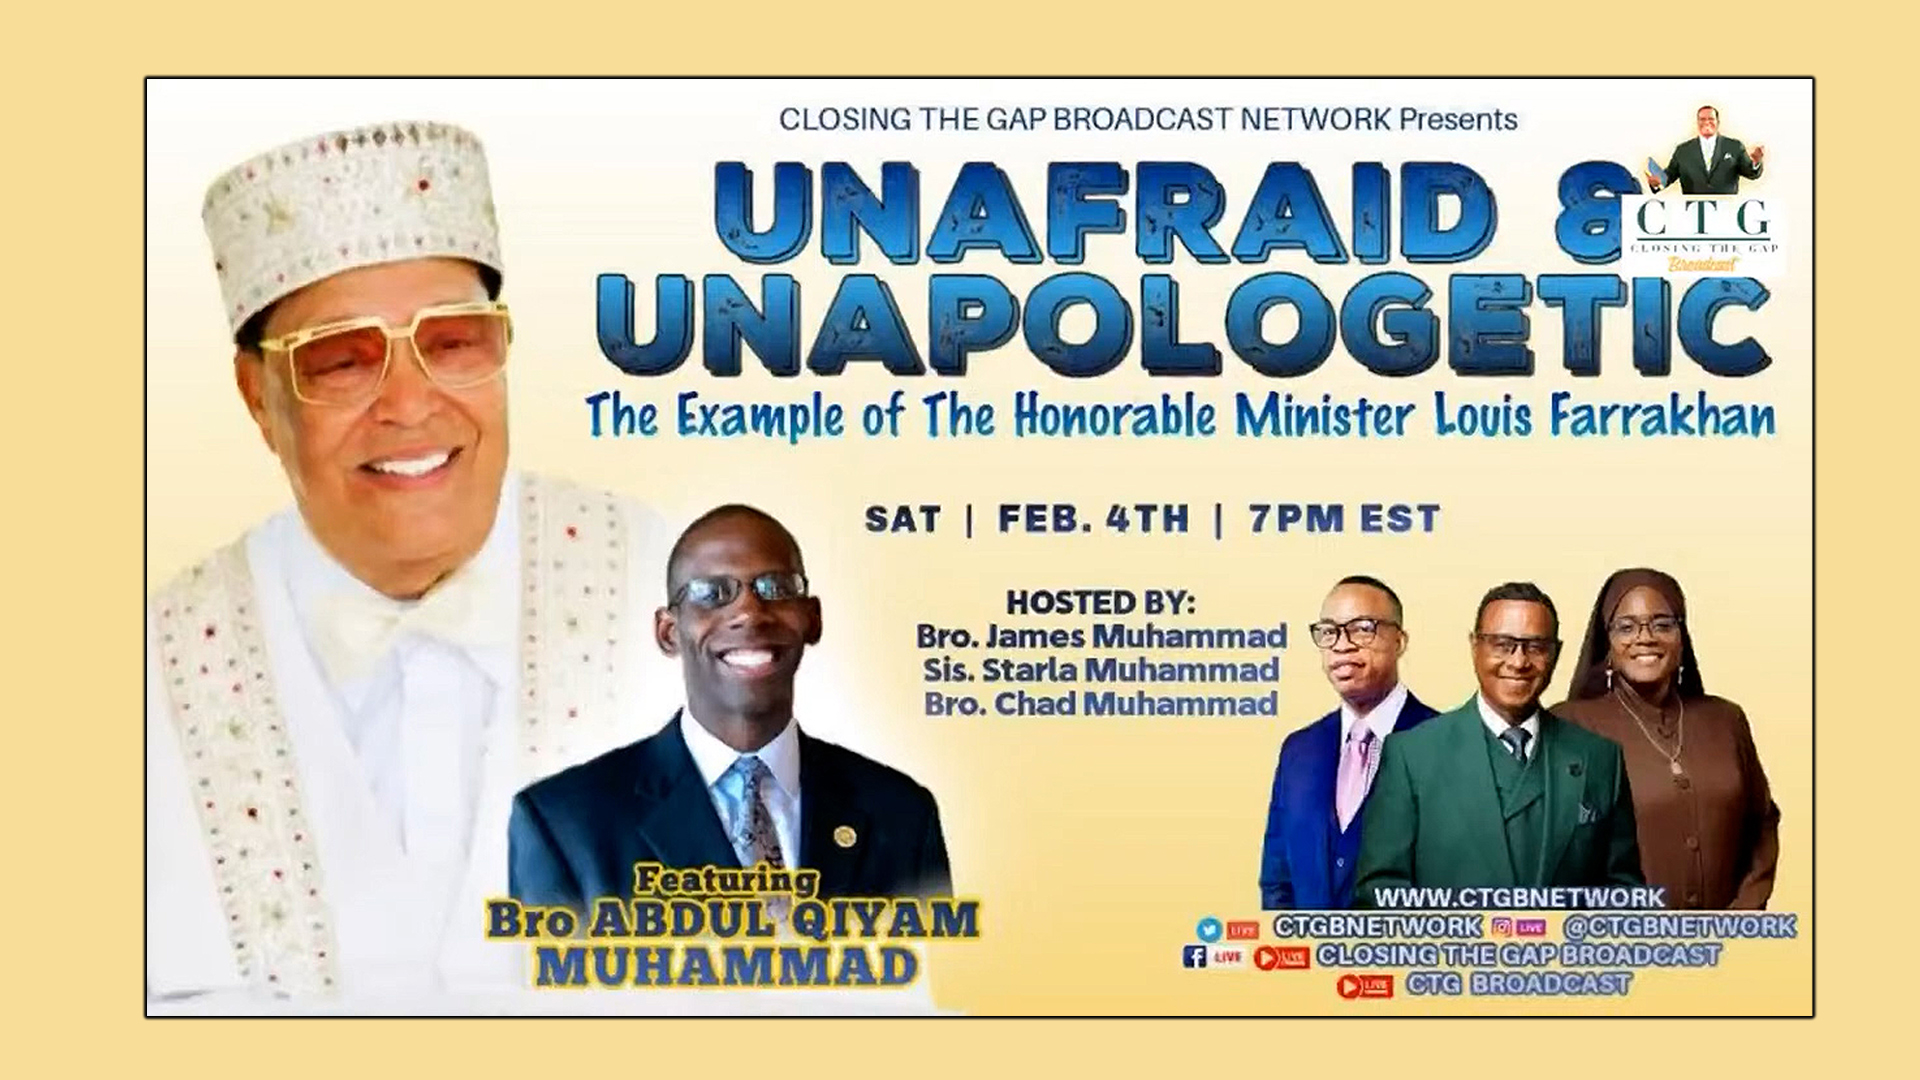 Unafraid and Unapologetic: The Example of The Honorable Louis Farrakhan